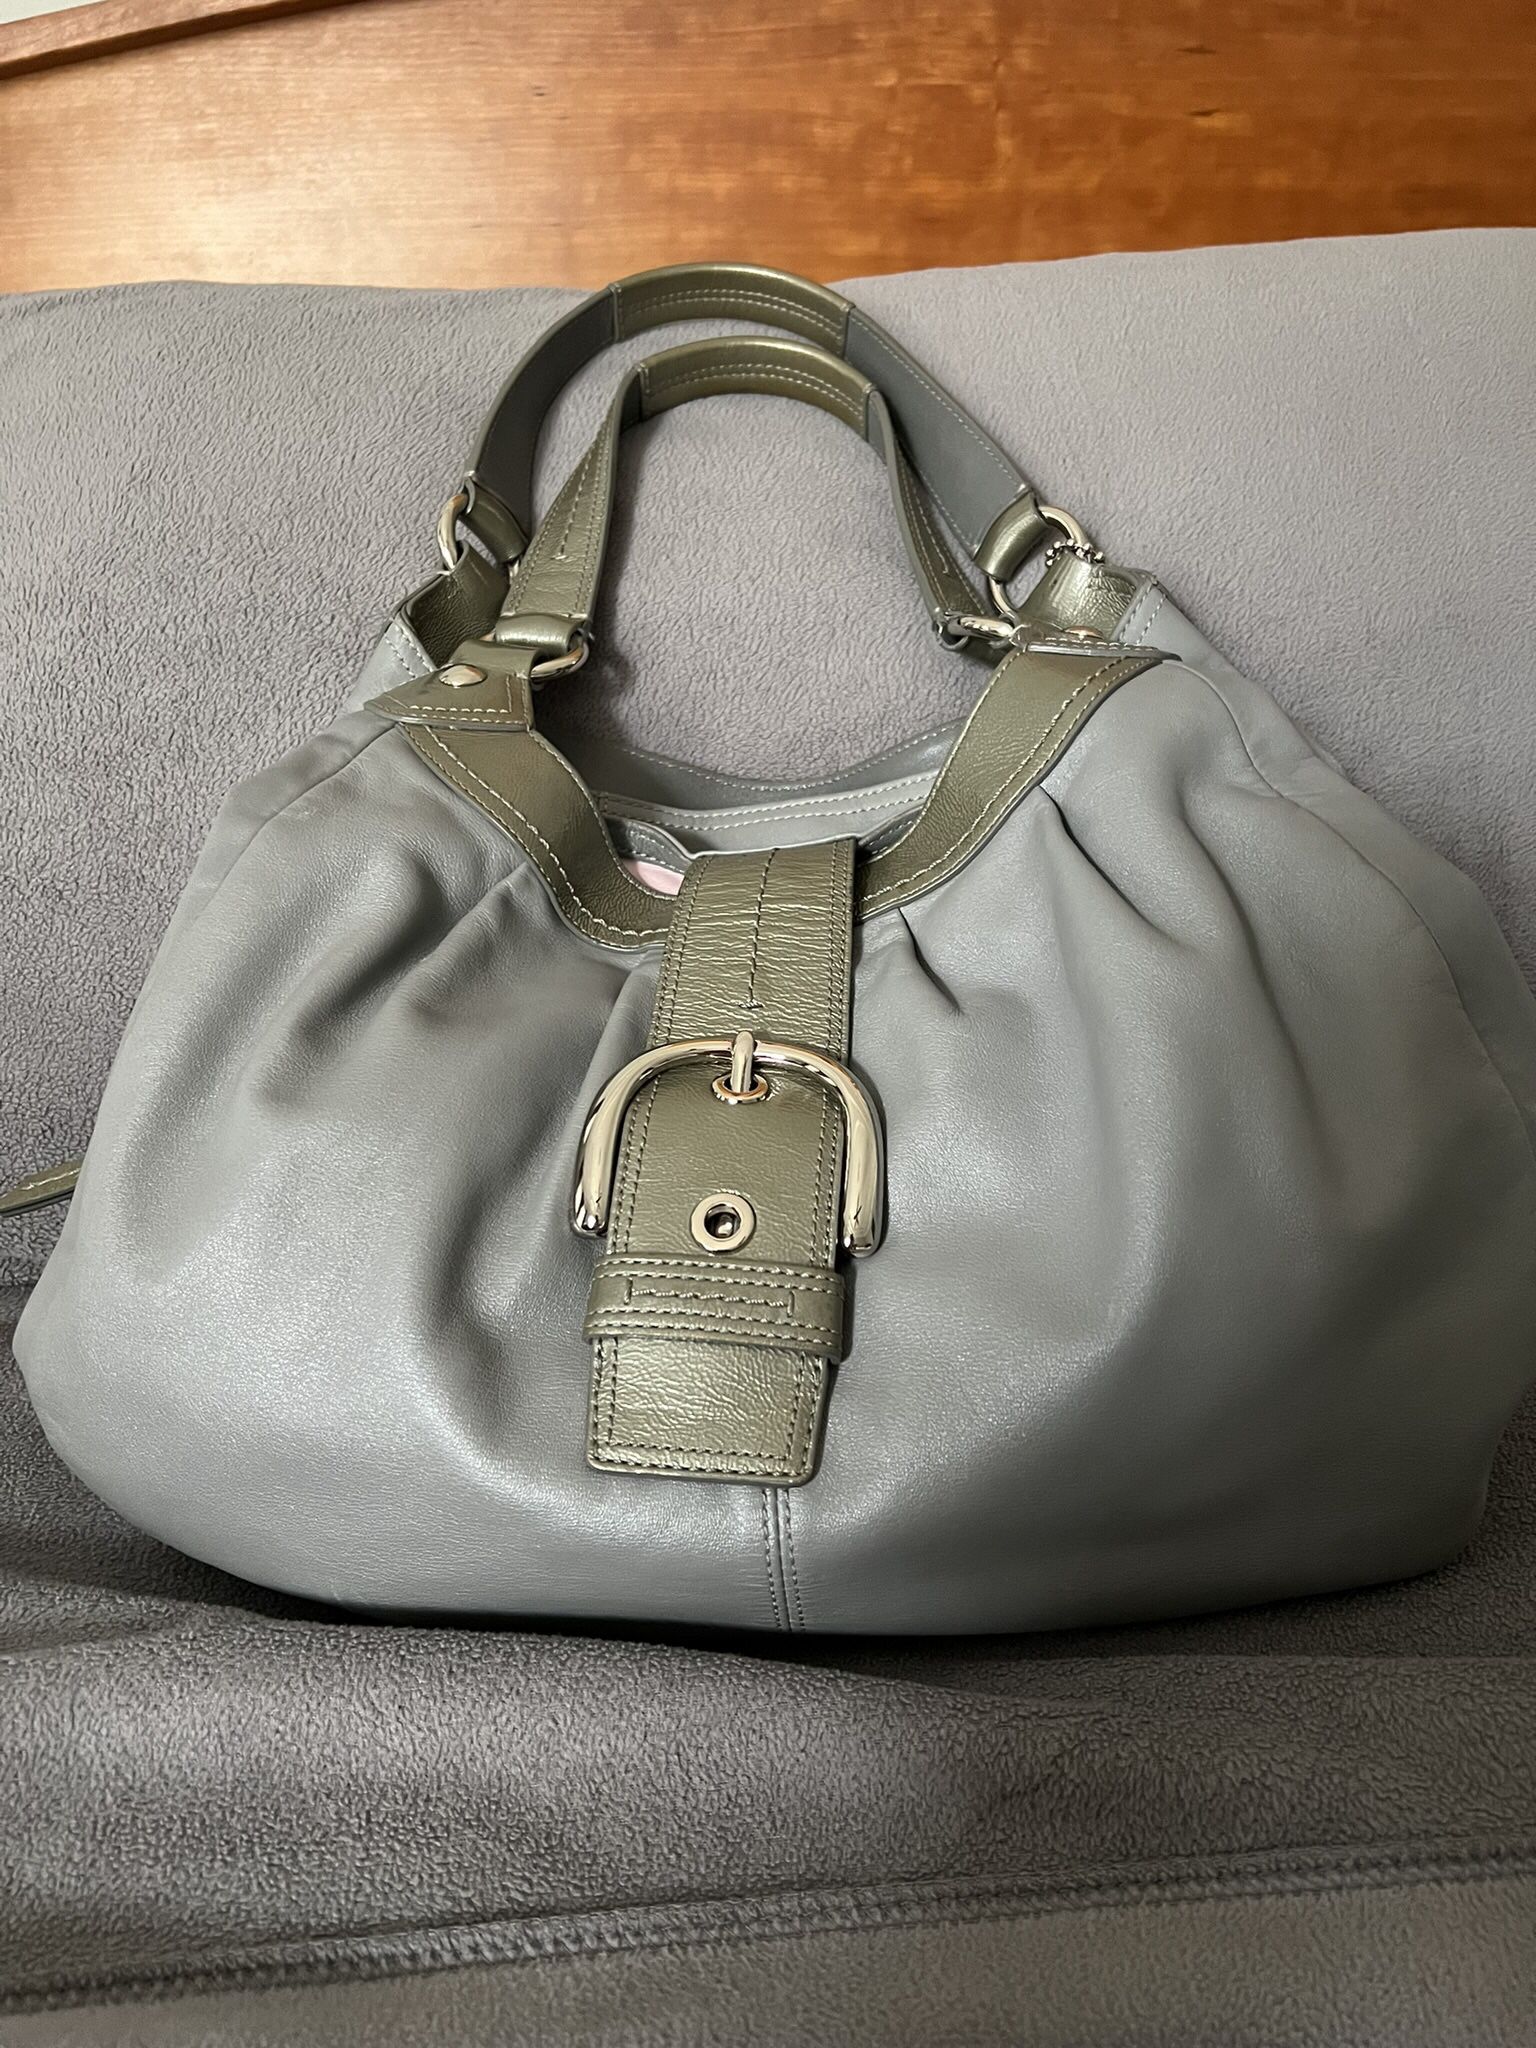 Coach Large Leather Hobo Bag Measurements 11”H x 14”W x 5”D No F15075 in Excellent Condition Gently Used